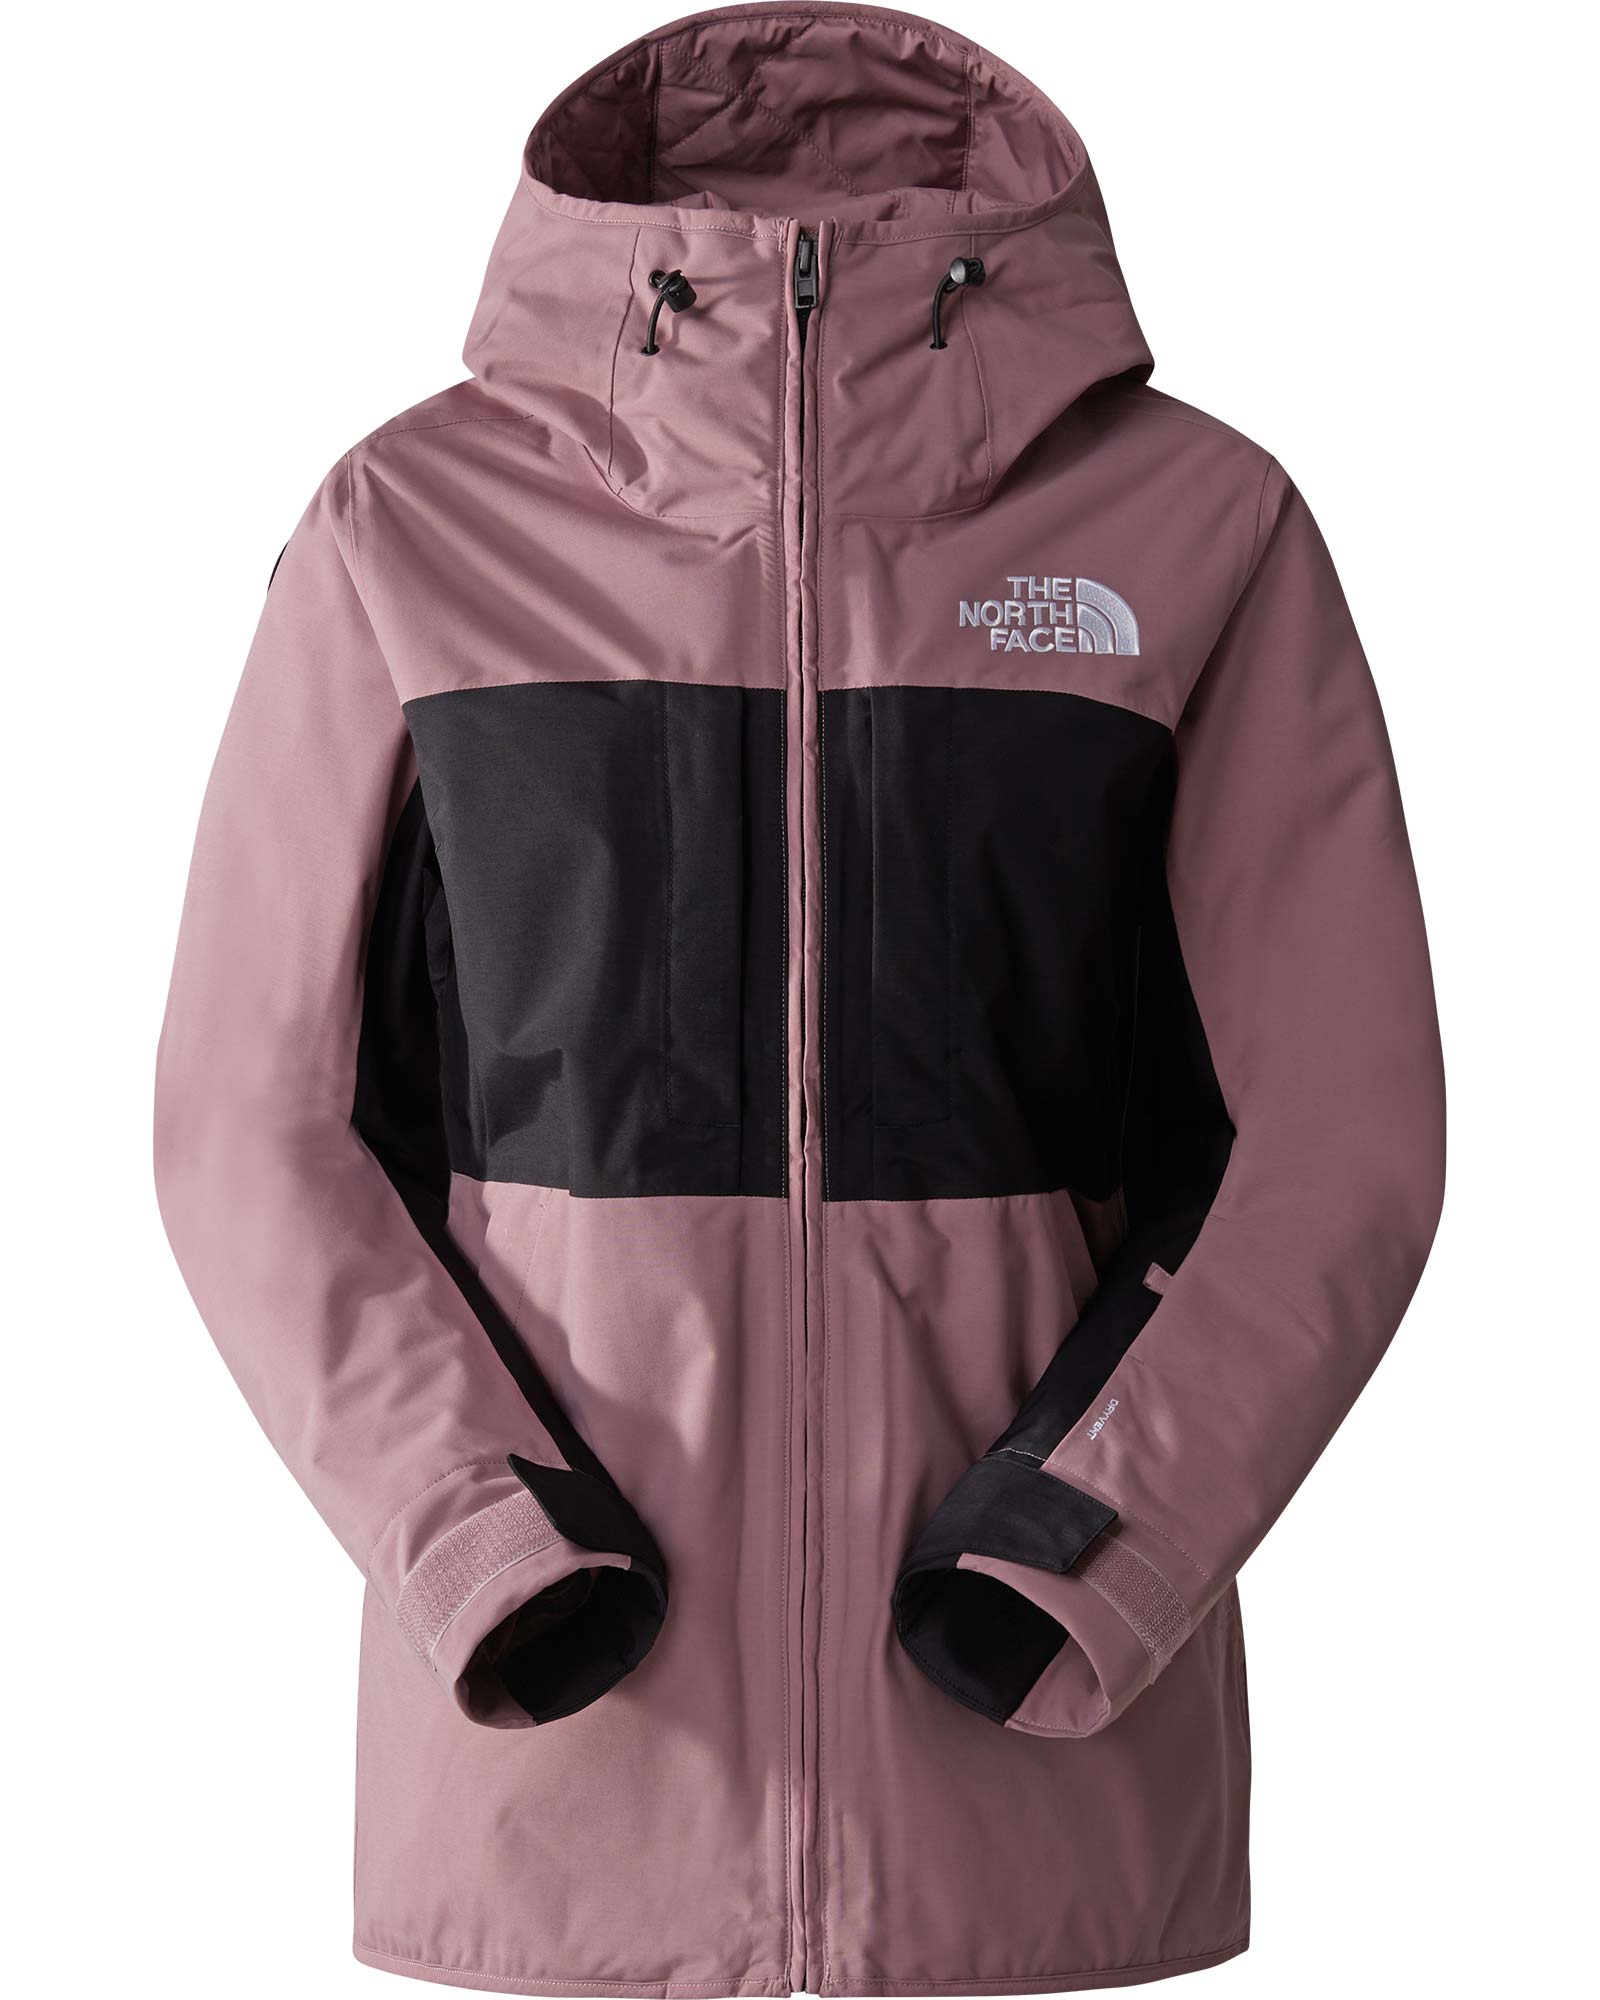 The North Face Women’s Namak Insulated Jacket - Fawn Grey/TNF Black M